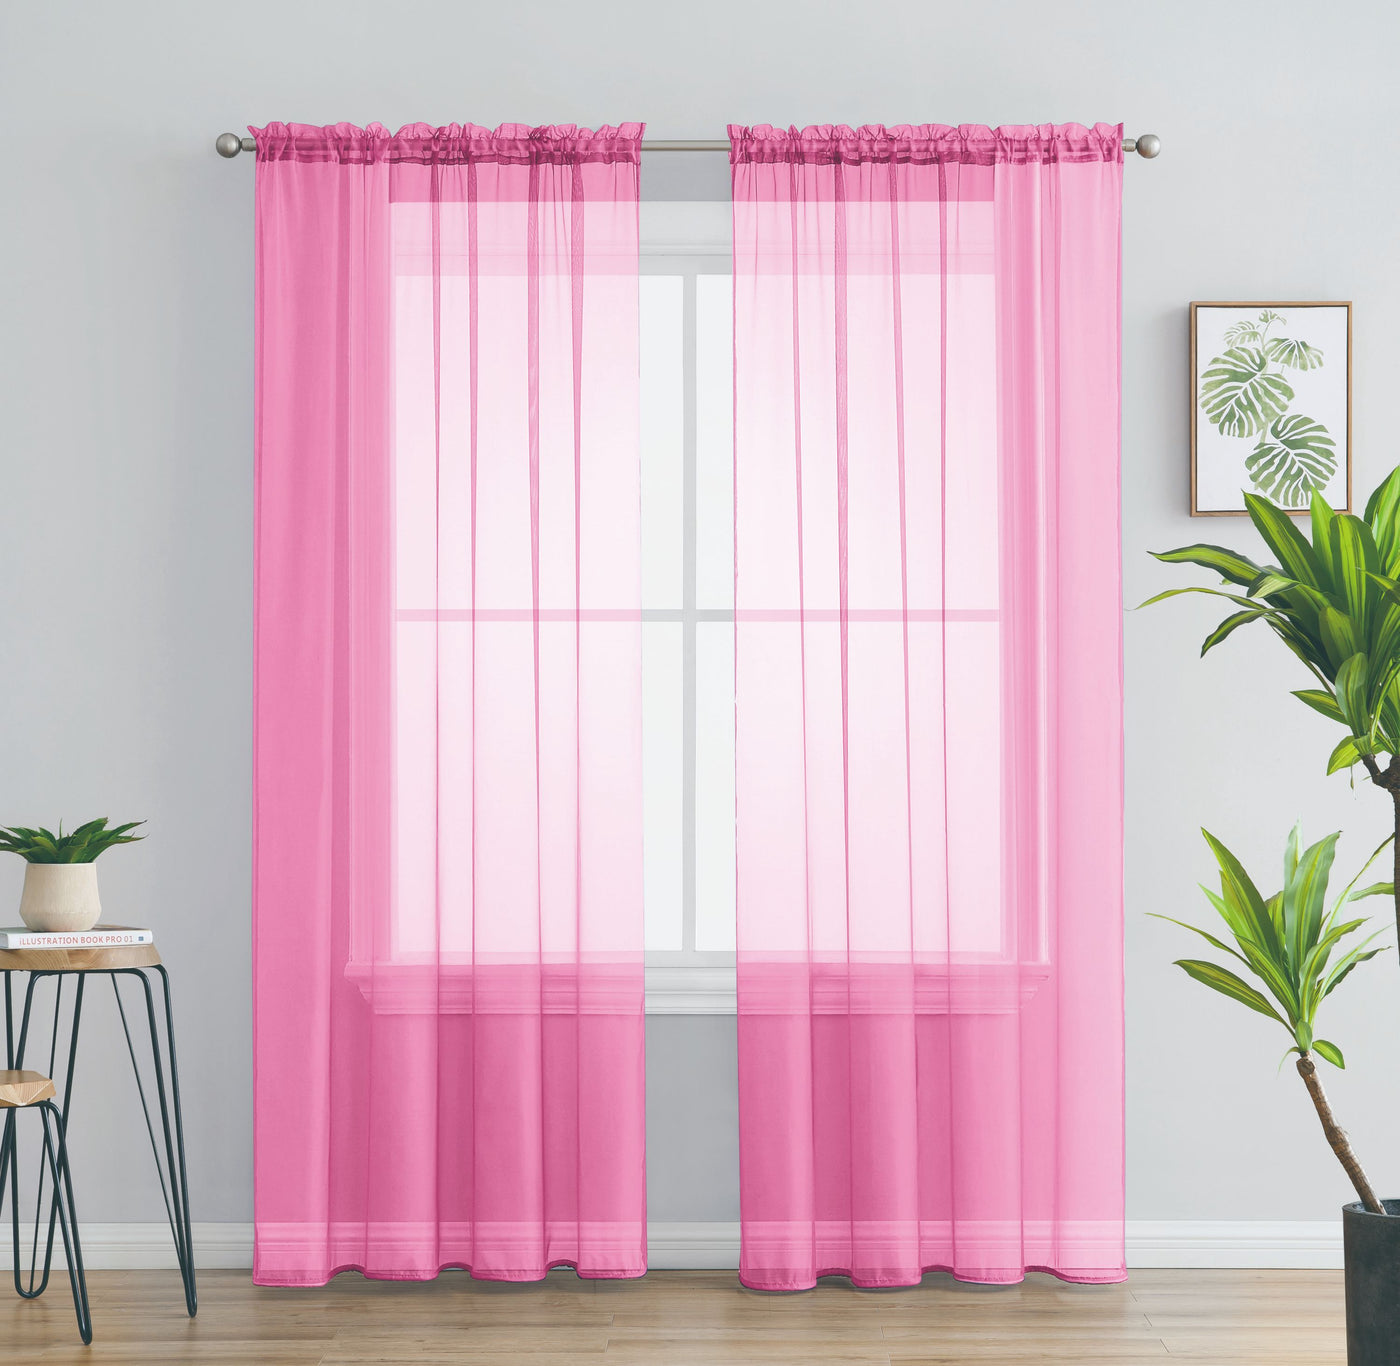 Solid Voile Rod Pocket Sheer Curtains for Bedroom Drapes Set of 2 90" Curtains for Bedroom Panels Window Treatment Home Decor 90" - Jenin-Home-Furnishing.CURTAINS